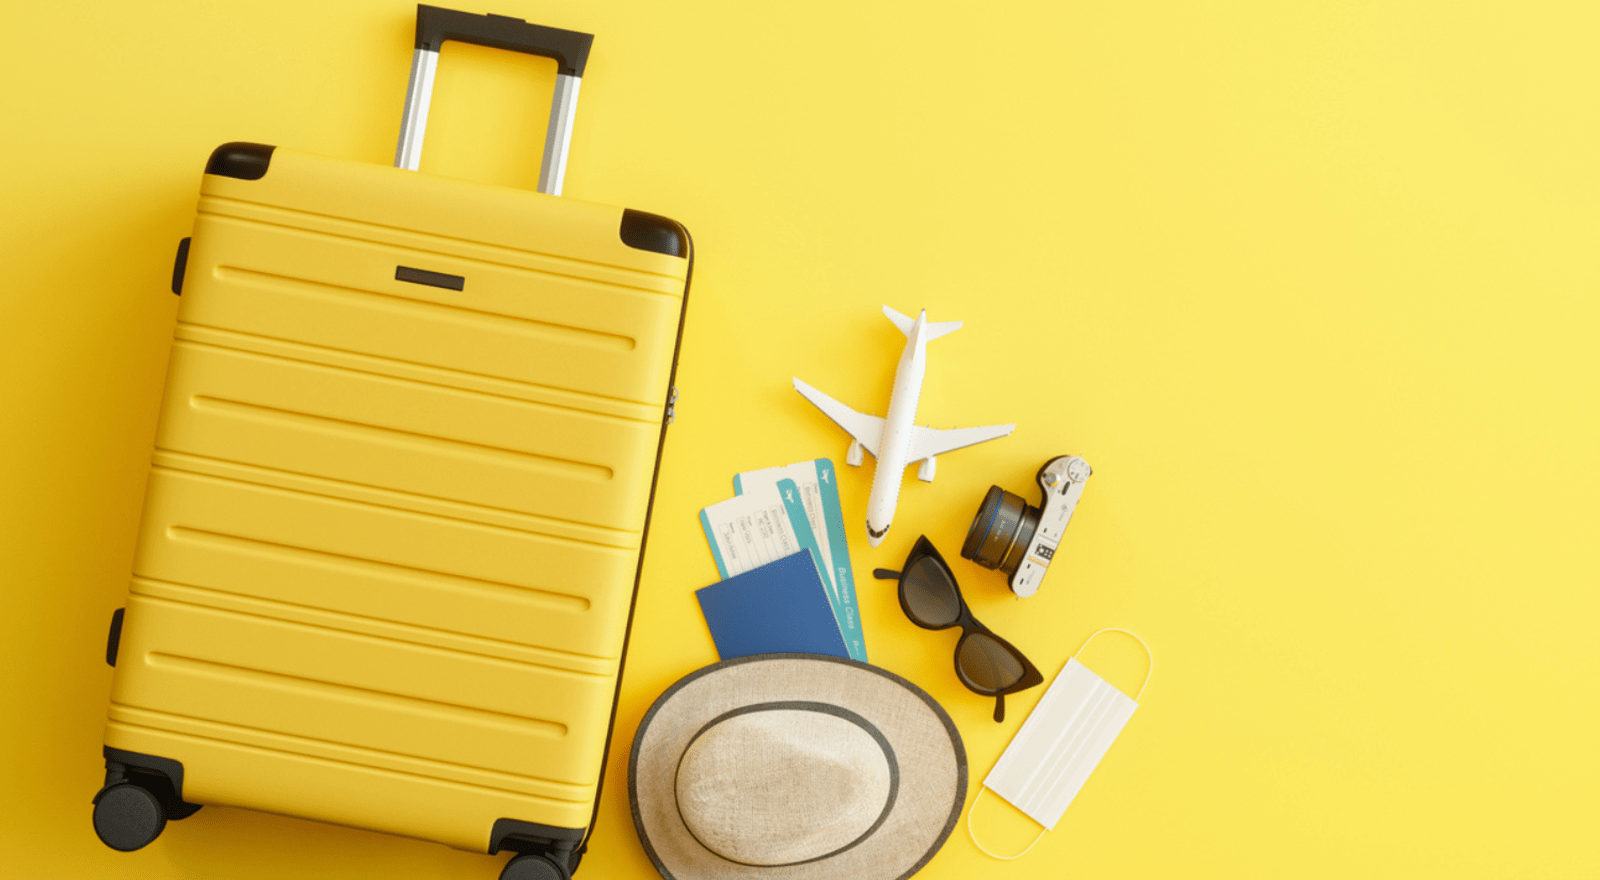 luggage on yellow background with other travel objects